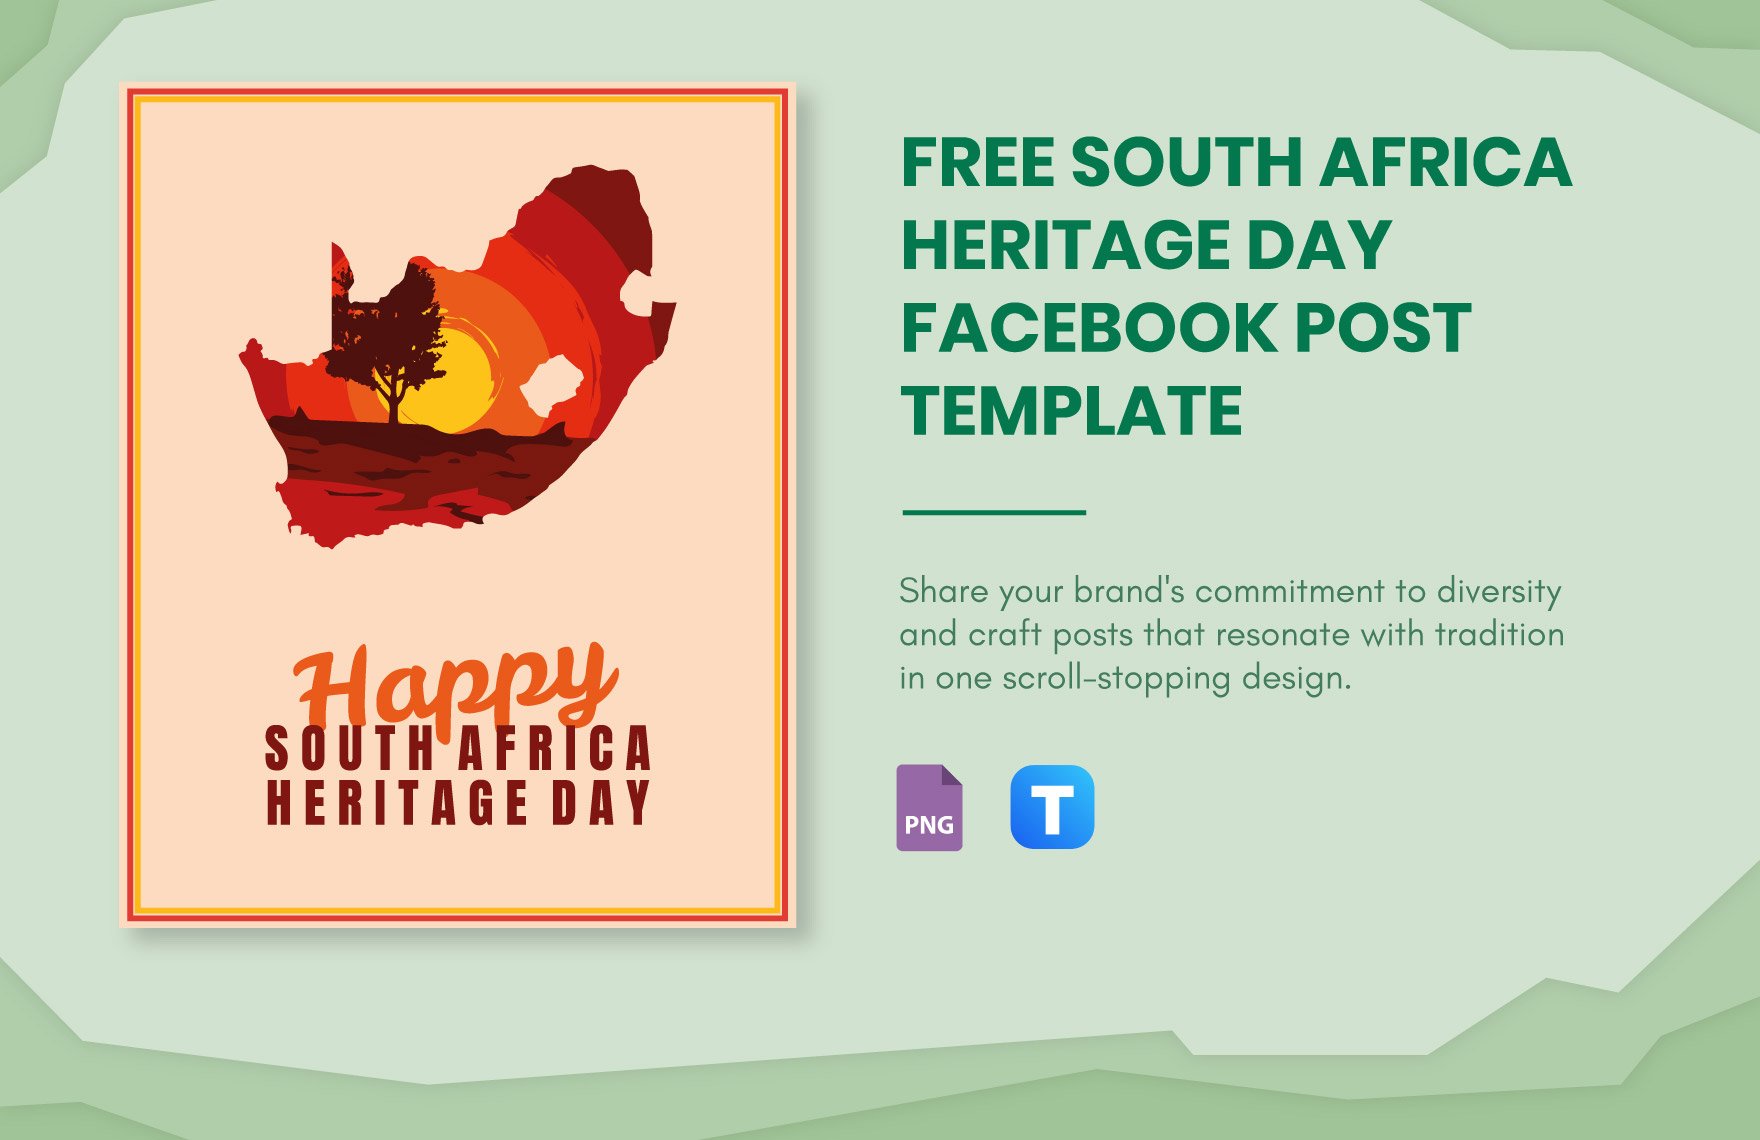 Free South Africa Heritage Day Facebook Post Template in PNG